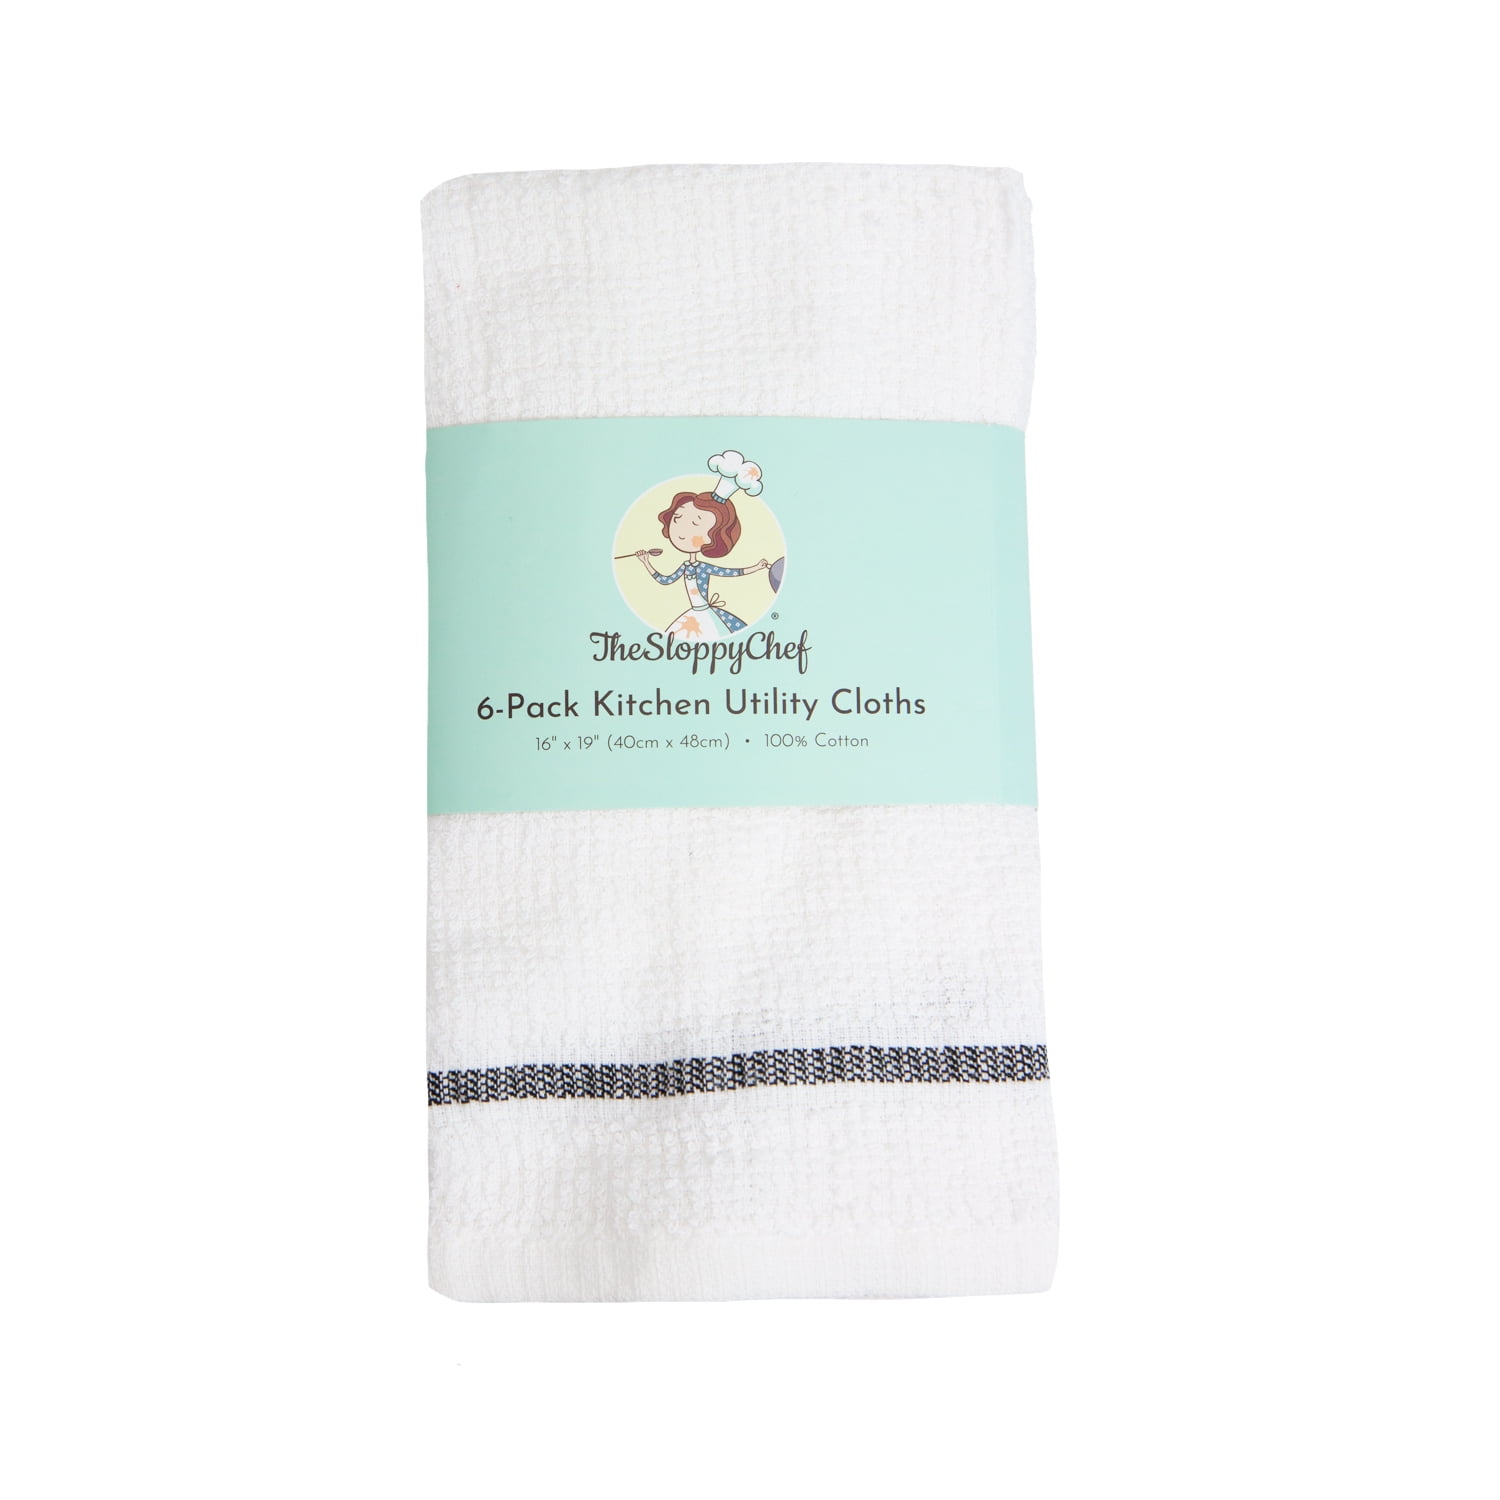 Bar Towels - Bar Mop Cleaning Kitchen Towels (12 Pack 16 x 19”) - Premium Ring-Spun Cotton White Kitchen Bar Towels Restaurant Cleaning Towels